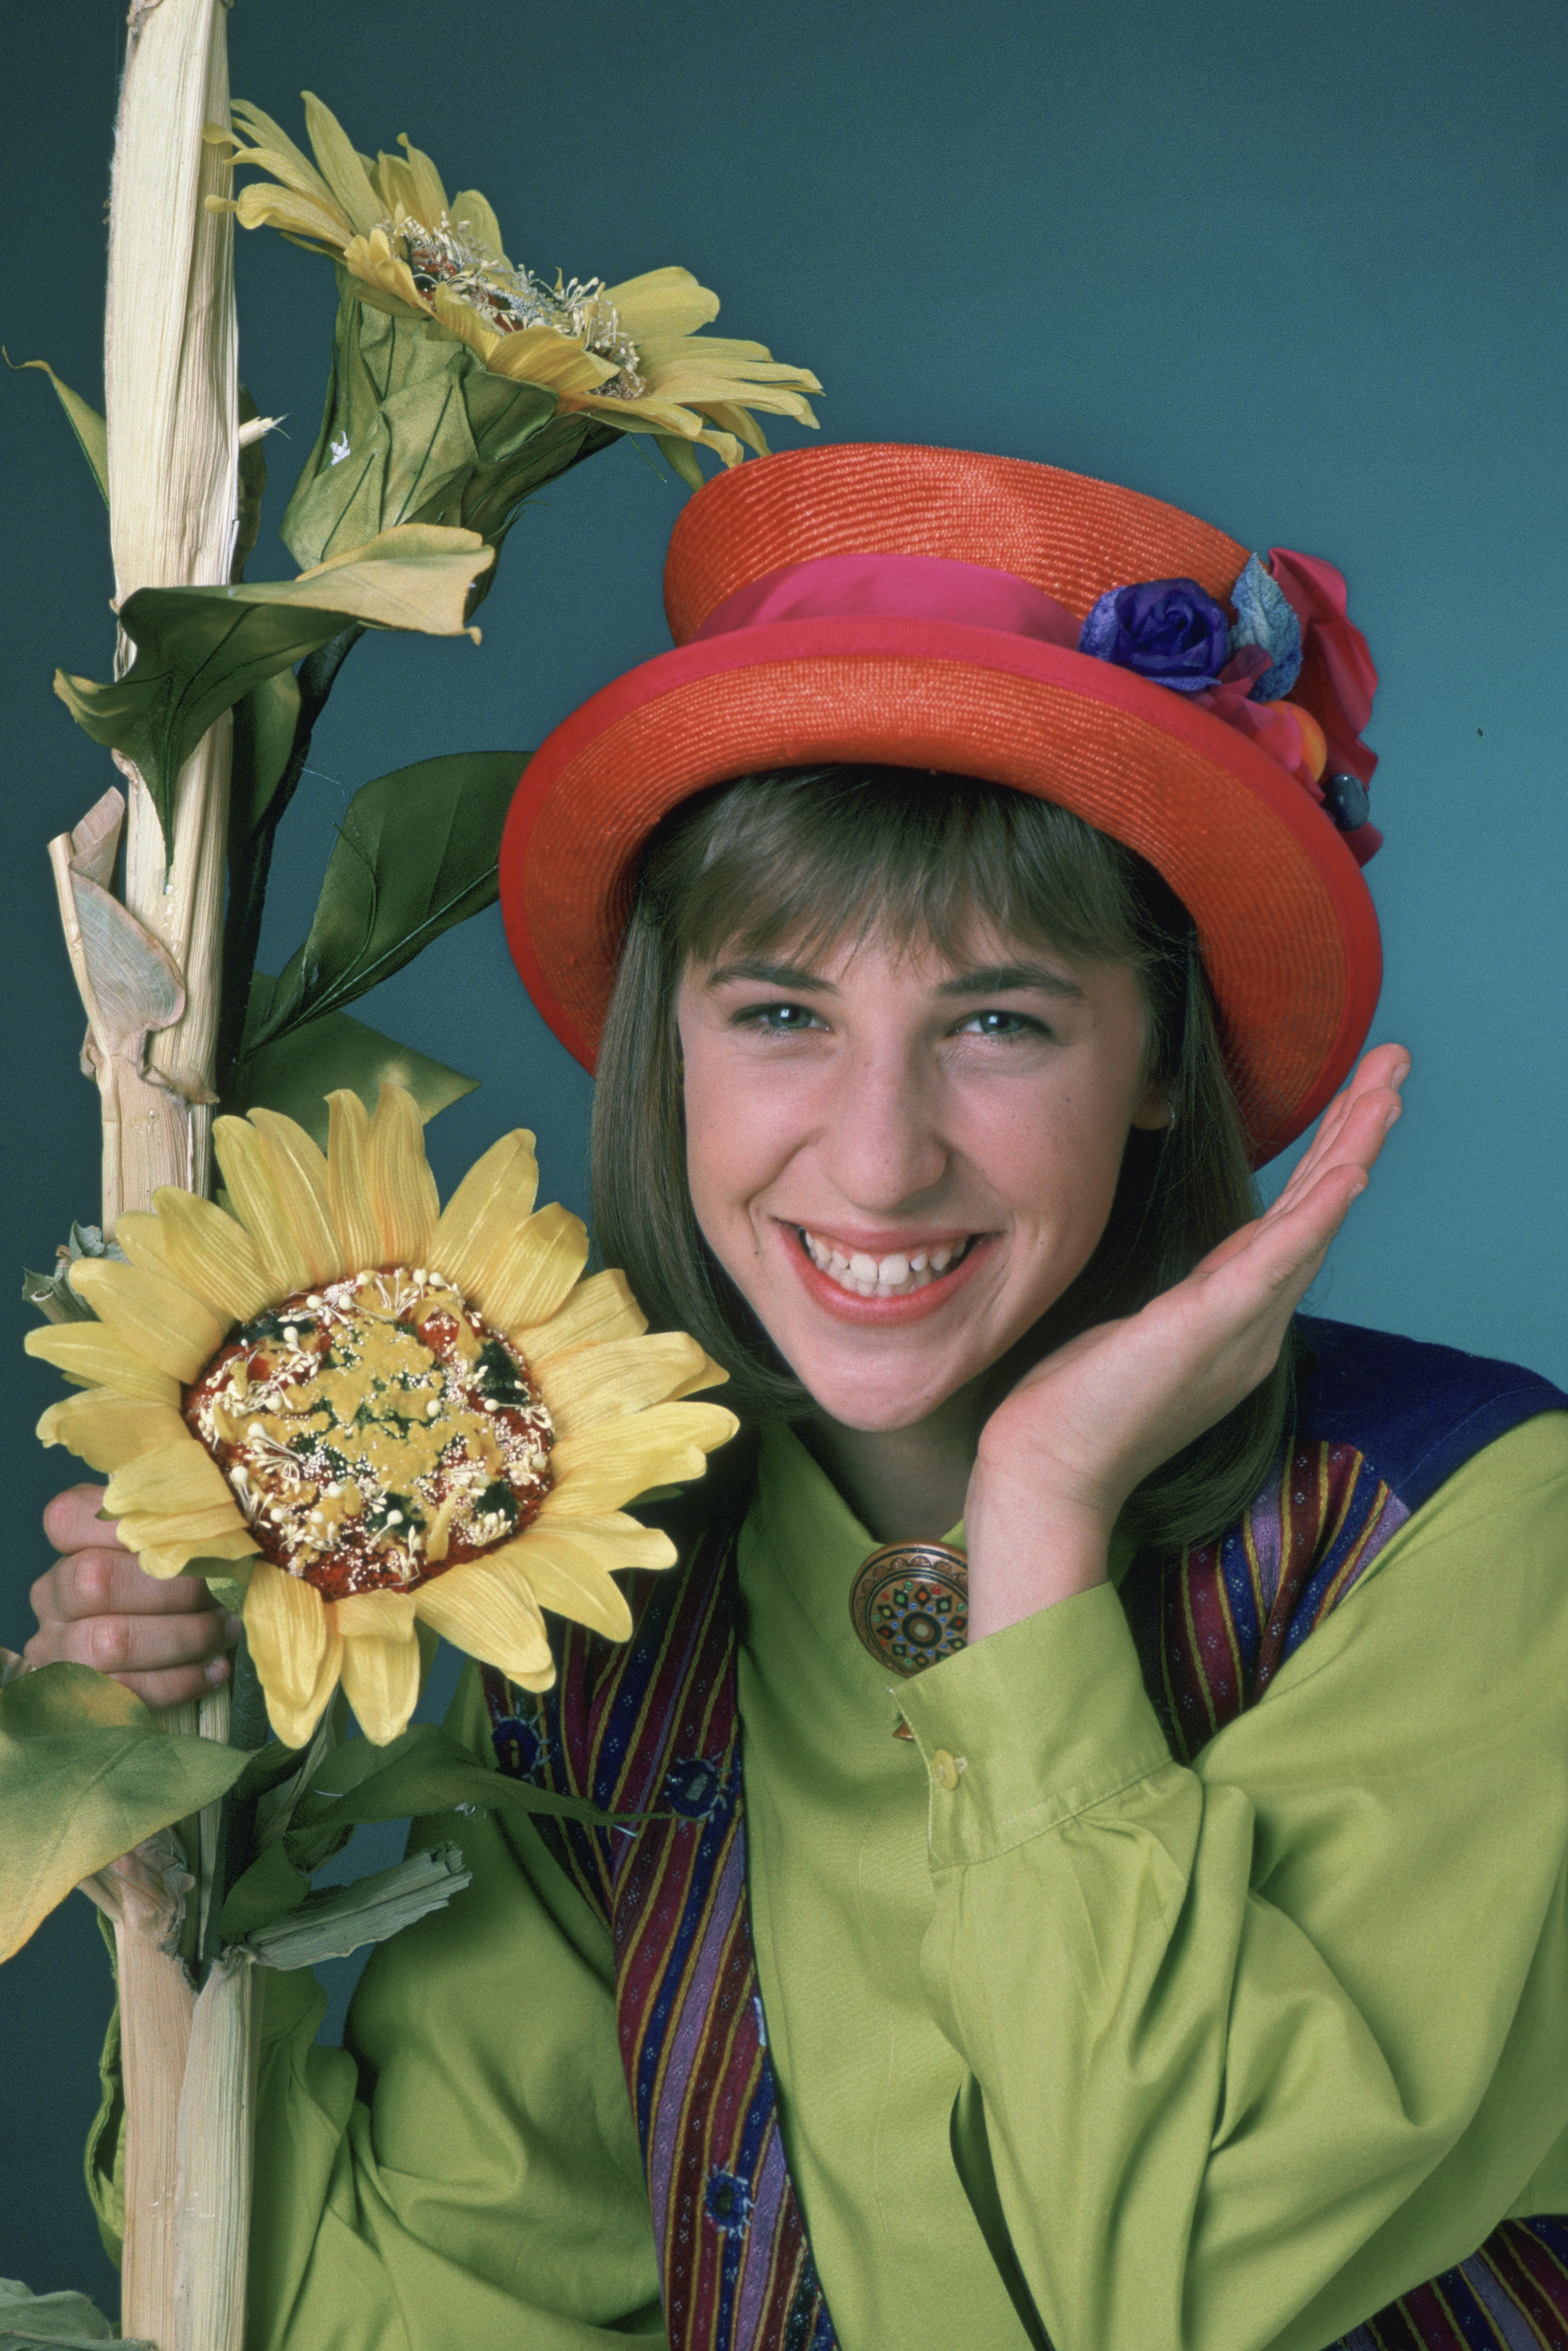 An undated image of Mayim Bialik on the set of "Blossom." | Source: Getty Images